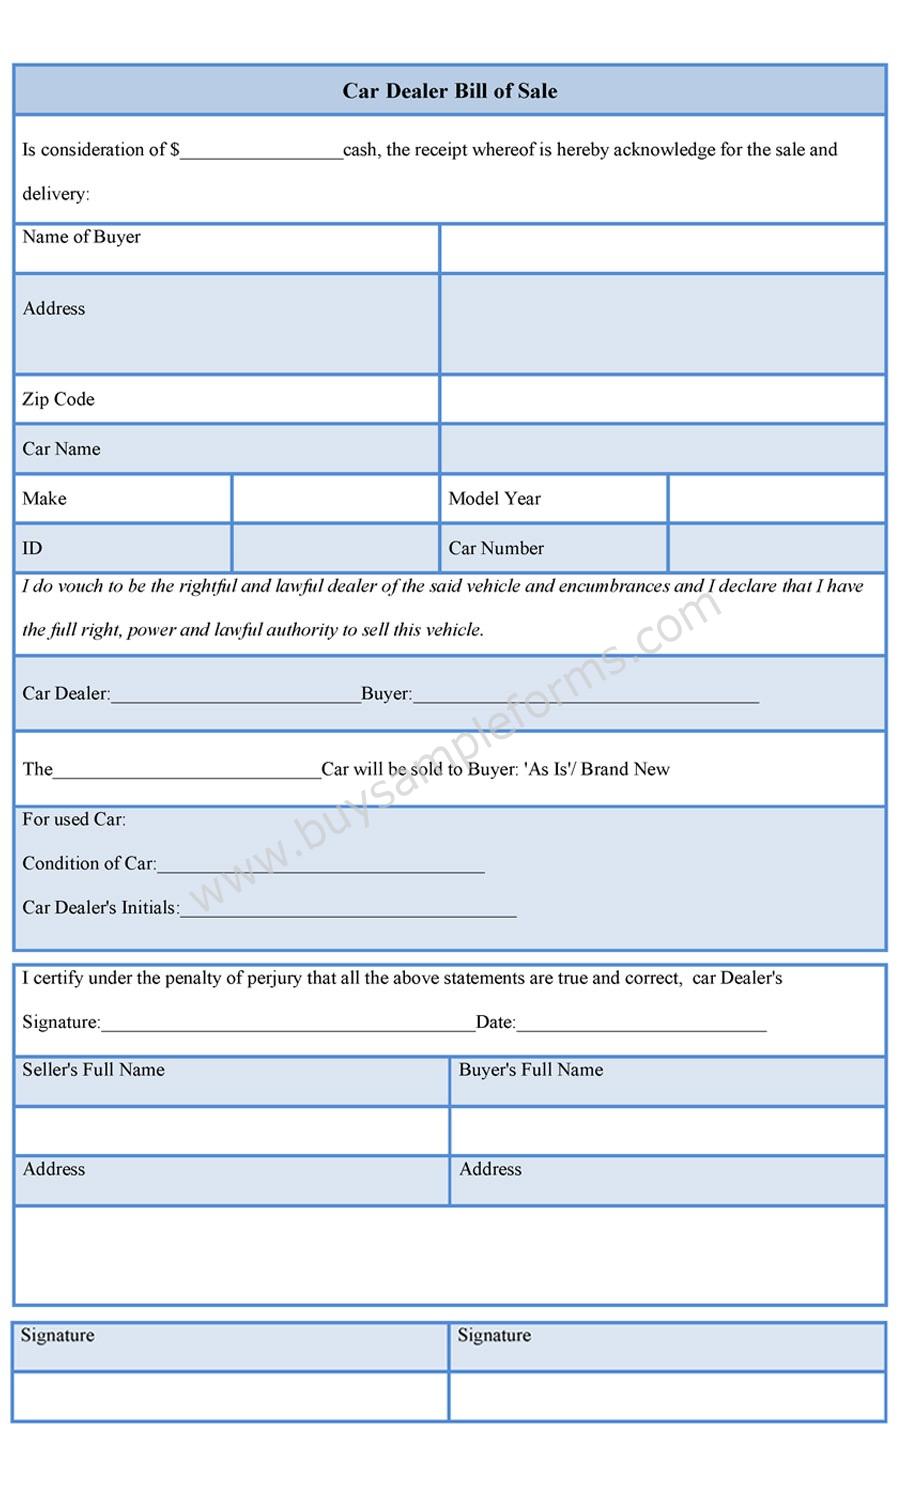 Dealer Application Form Template from www.buysampleforms.com